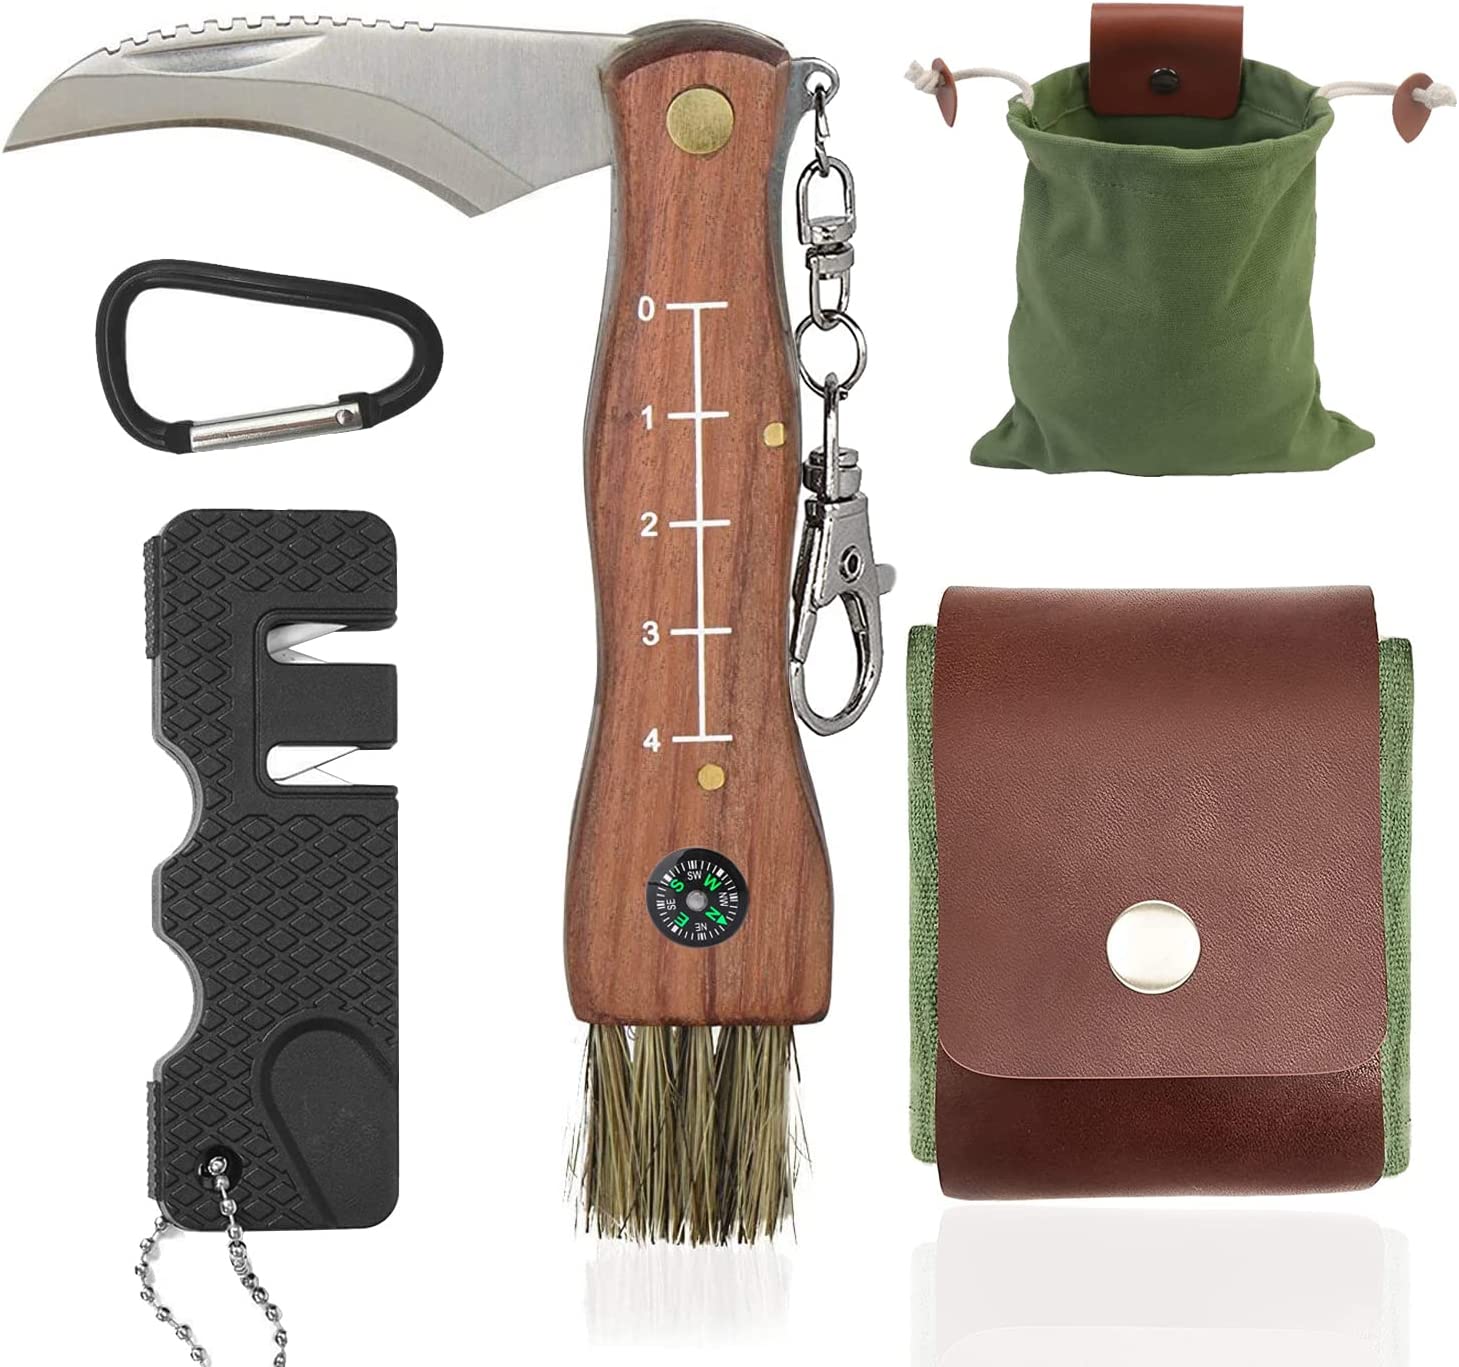 Mushroom Knife with Brush and Foraging Bag Kit, Folding Gardening Knife for Pruning, Foraging Knife with Belt Pouch & Sharpener, Harvest knifes for Outdoor Camping Hunting